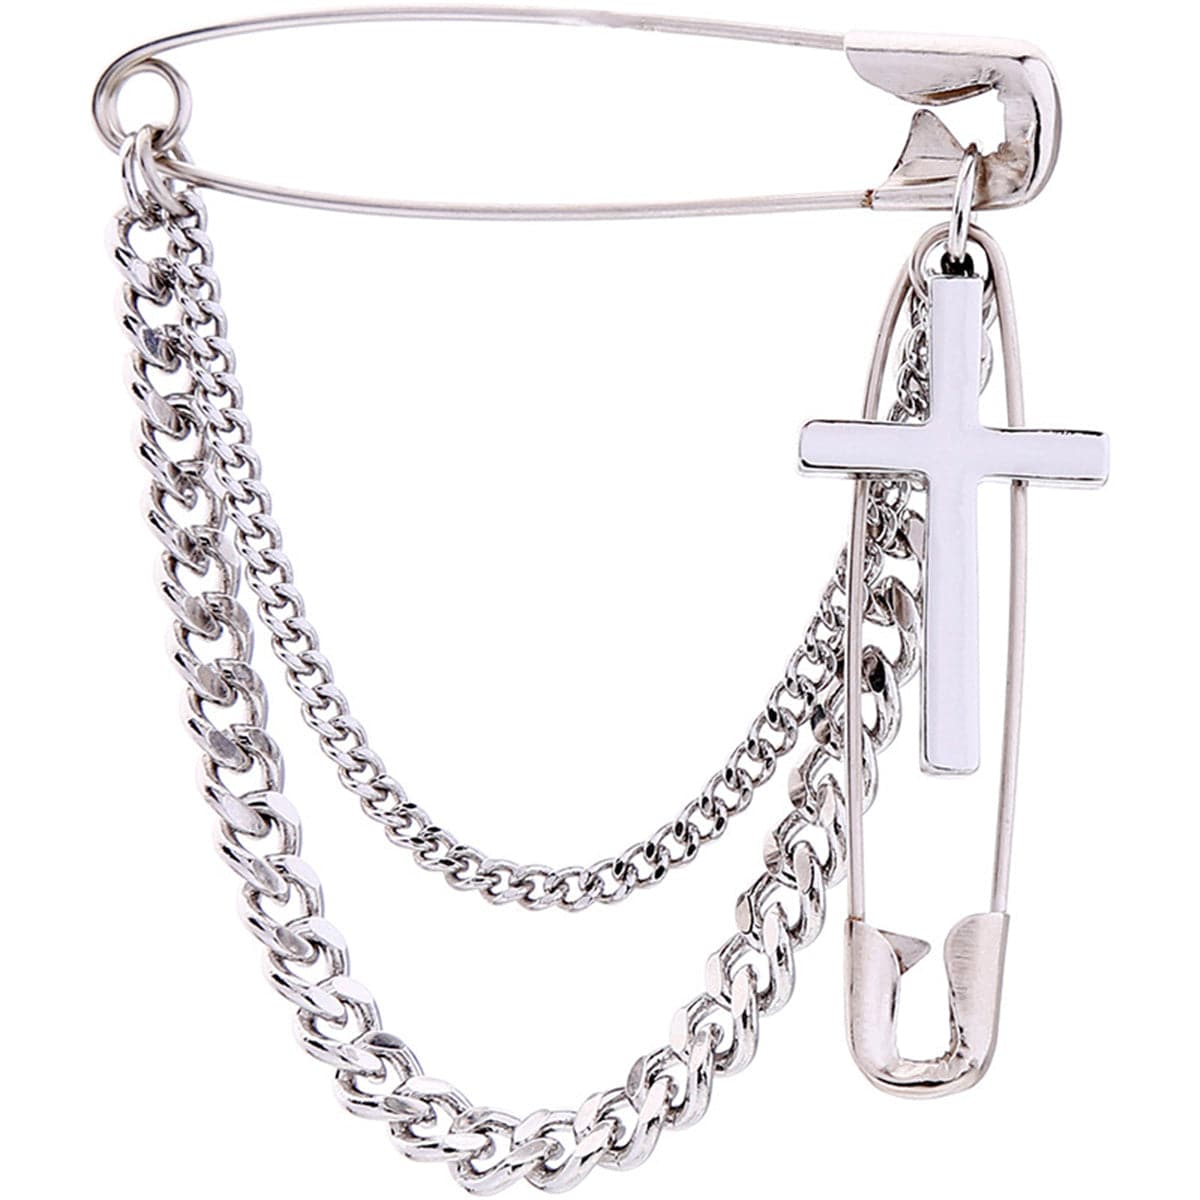 Silver-Plated Chain Link Cross Pin Brooch